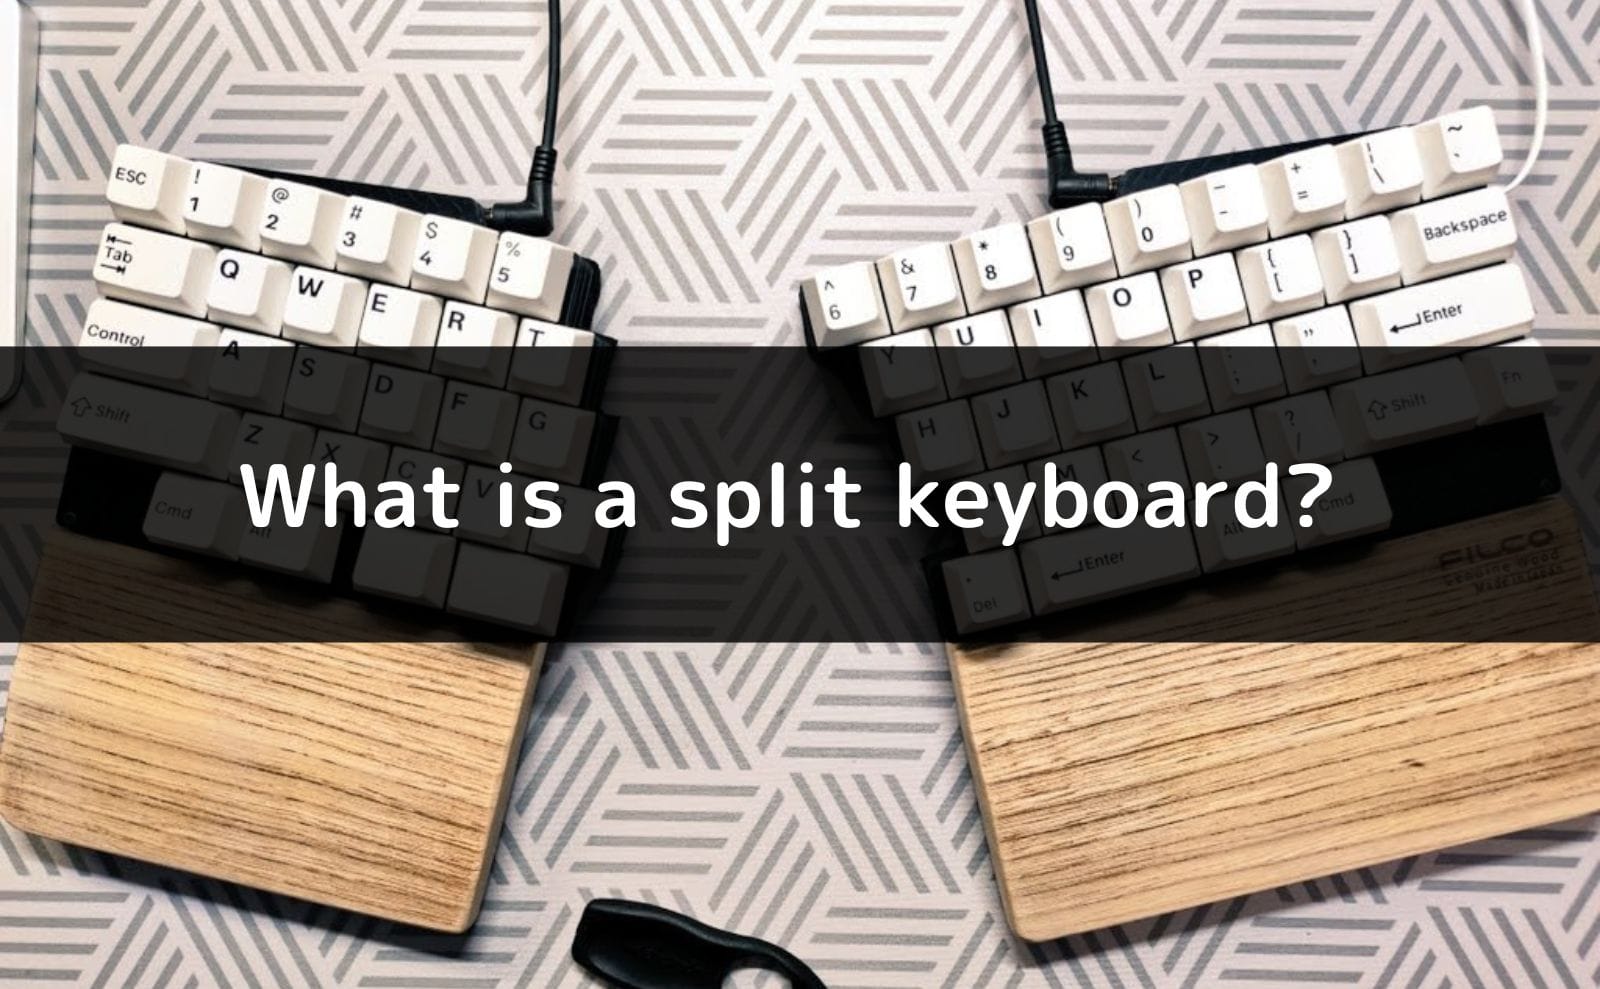 Can I recommend a split keyboard? Learn about the features and